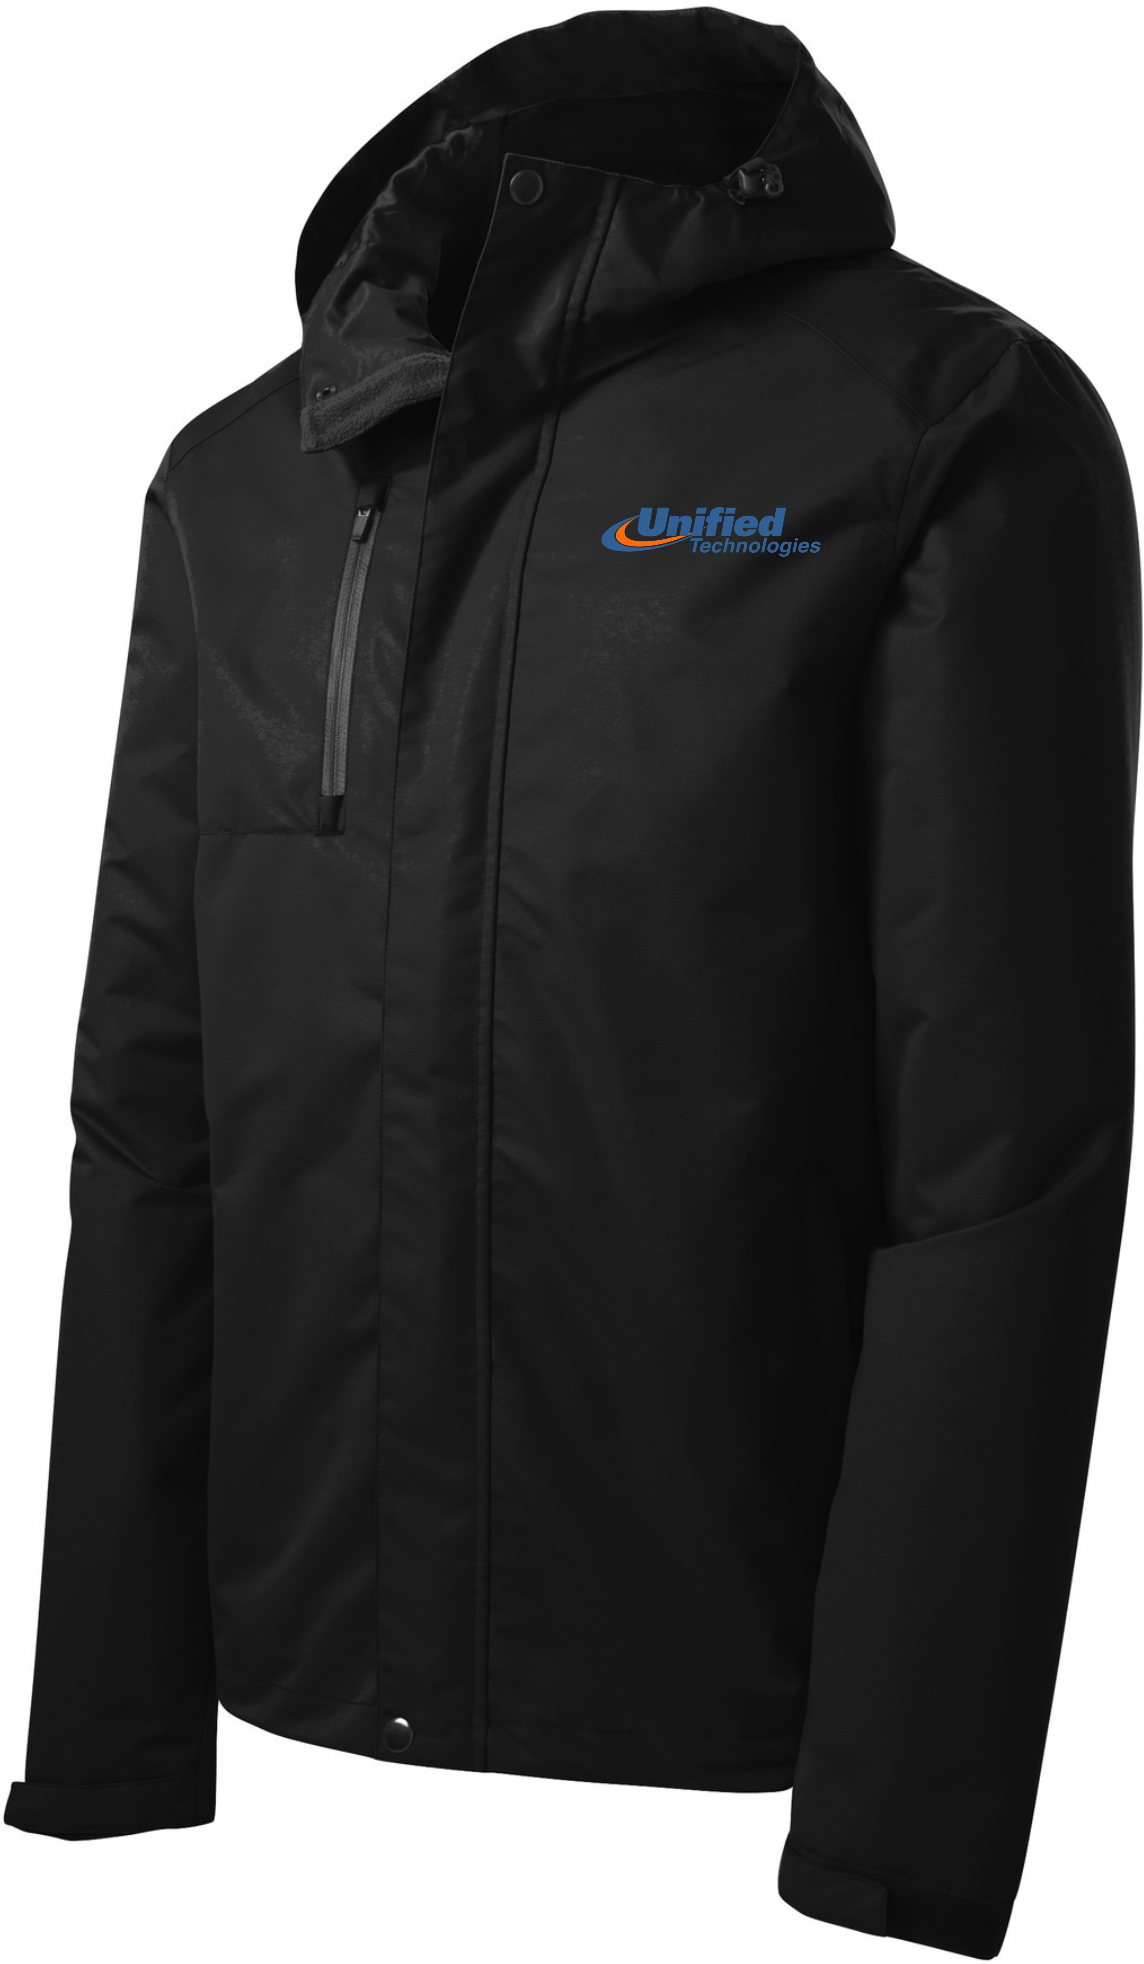 Port Authority® All-Conditions Jacket - J331